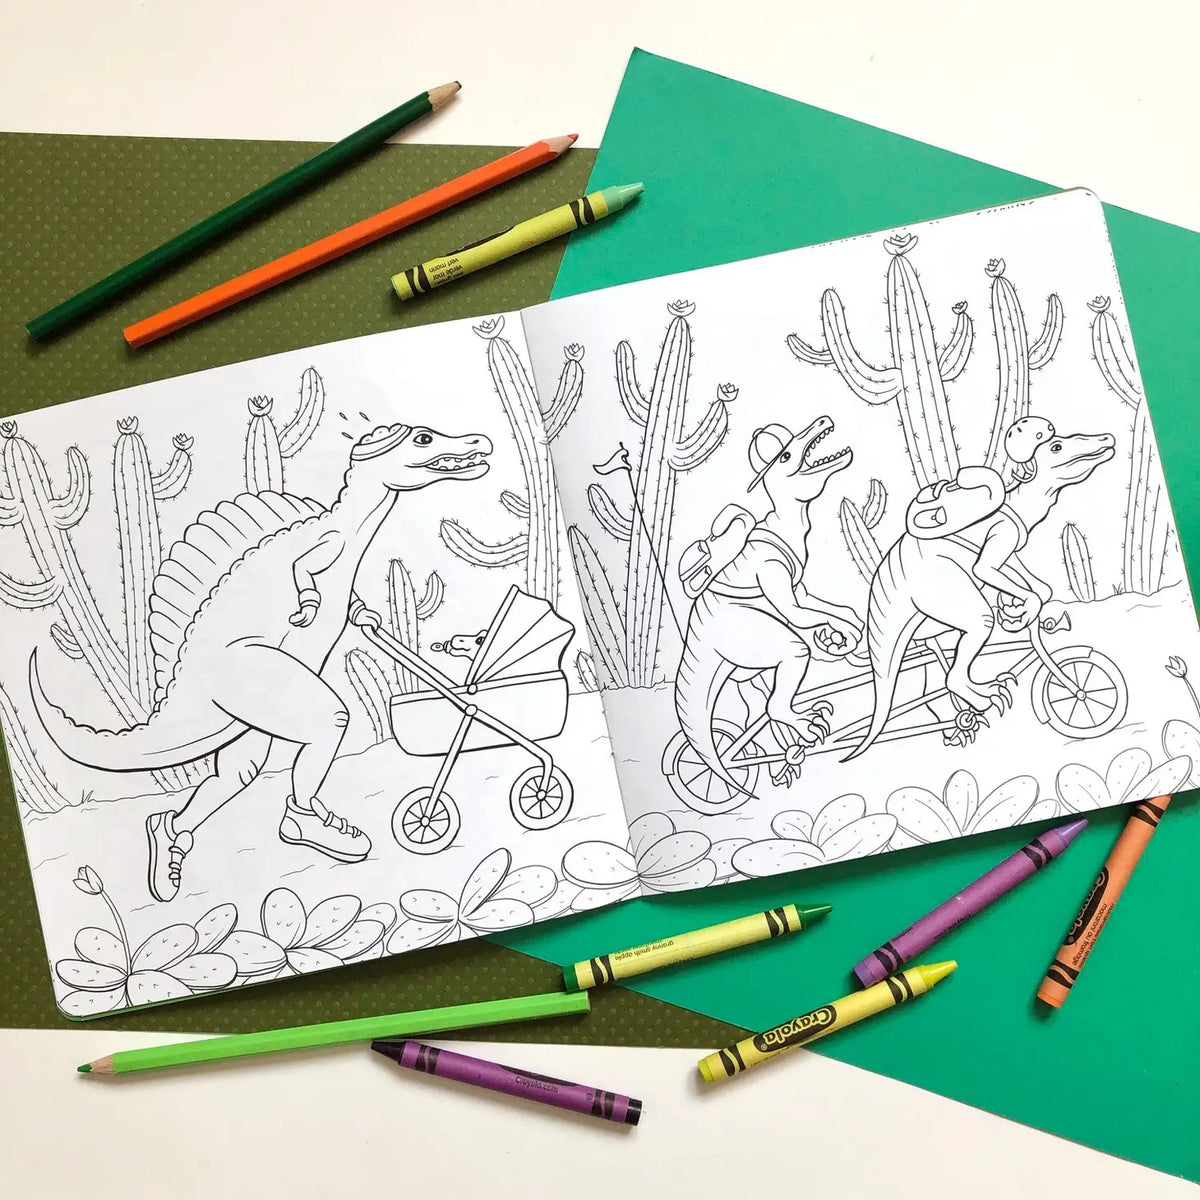 The Dinosaurs Coloring Book